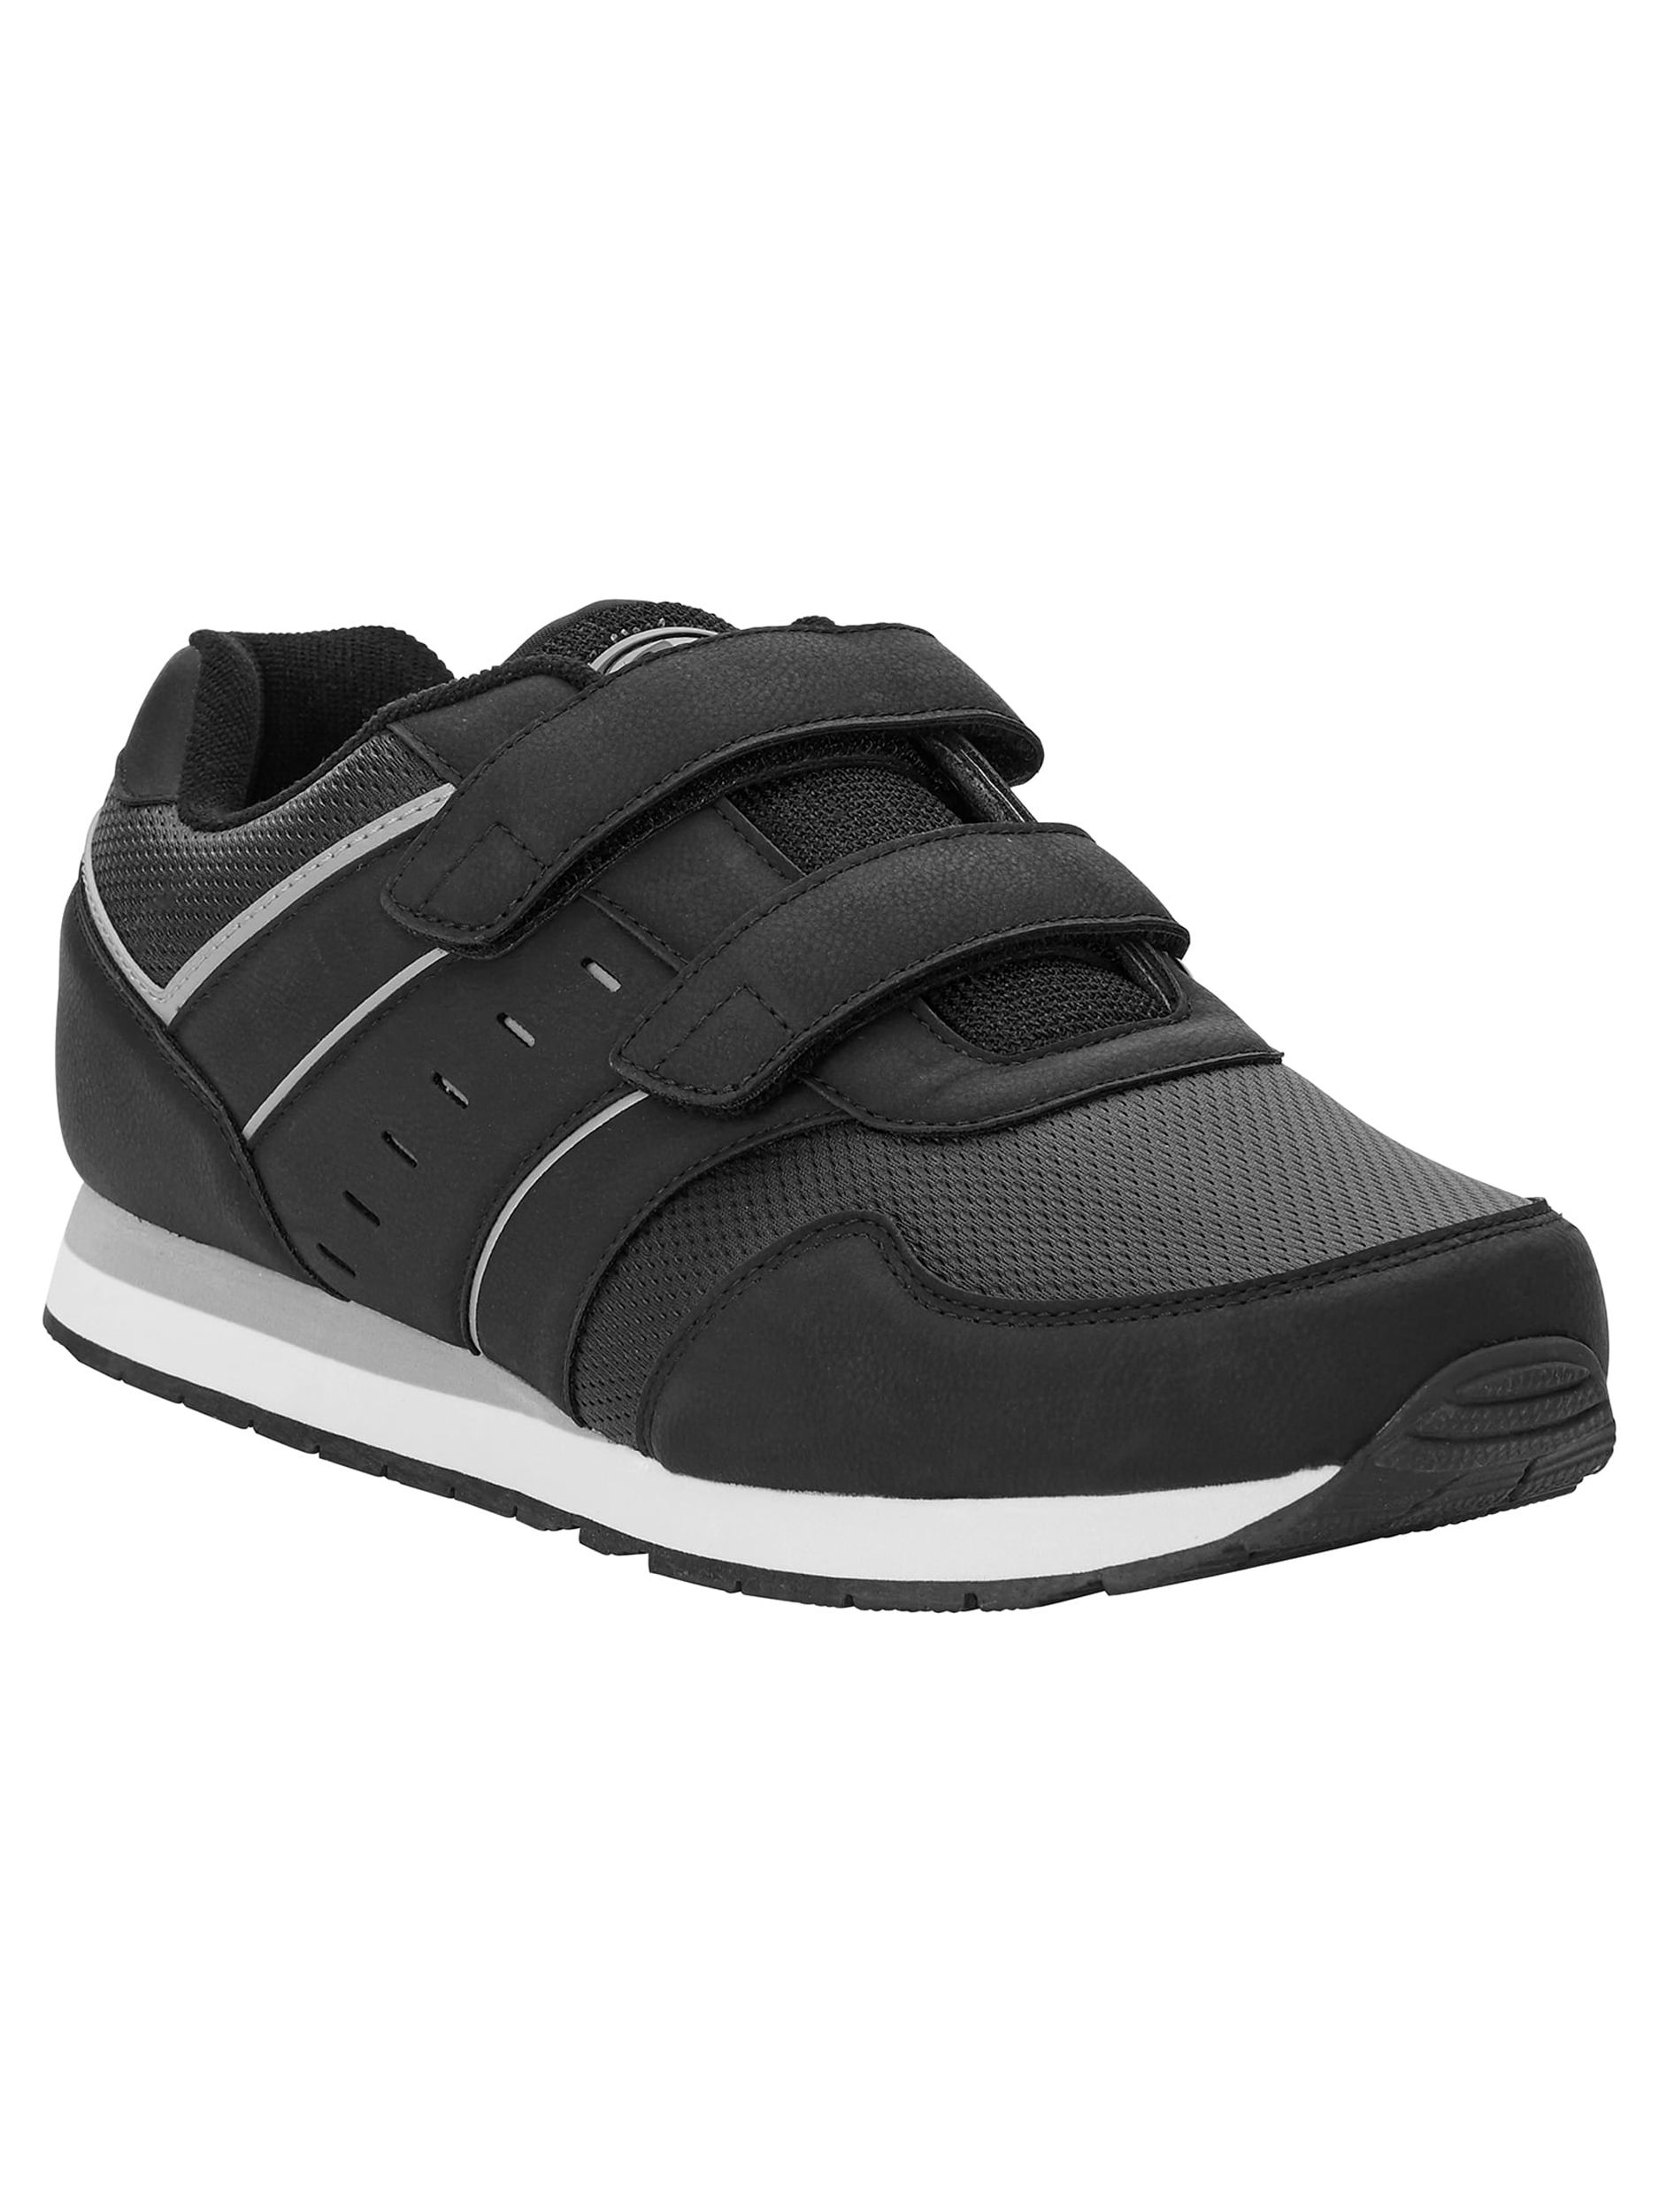 Athletic Works Men's Silver Series 3 Wide Width Athletic Shoe - image 1 of 6